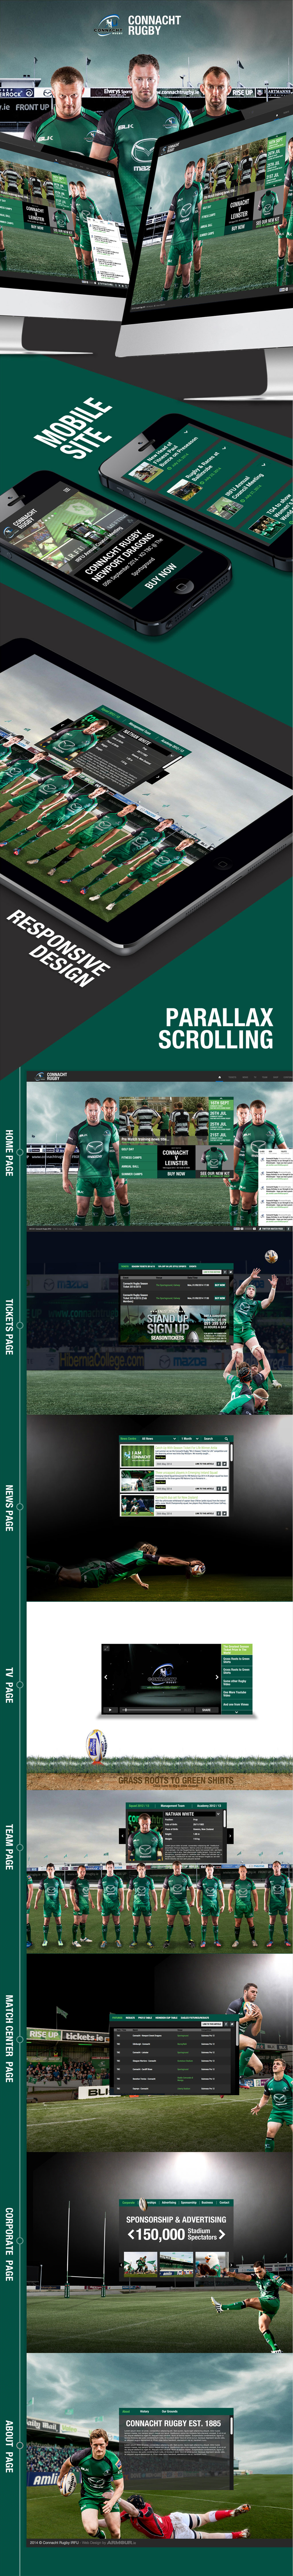 Rugby sports Parallax Scrolling Pack award winning Players